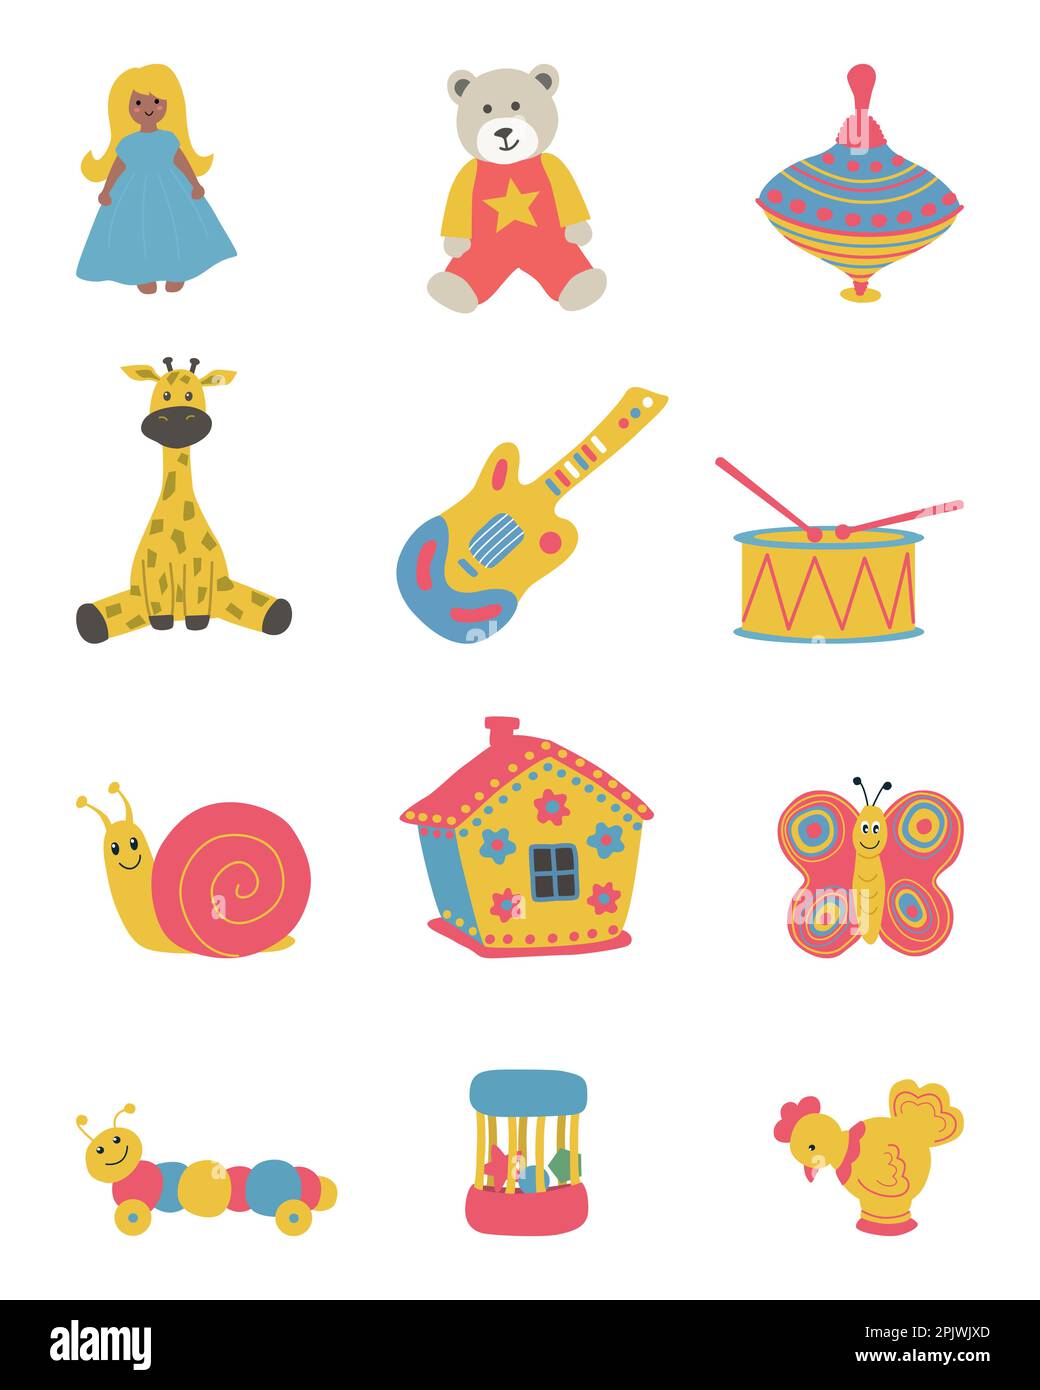 Toys isolated on a white background. There is a doll, a teddy bear, a house, a spindle top, a giraf, a guitar, a drum and other things in the picture. Stock Vector